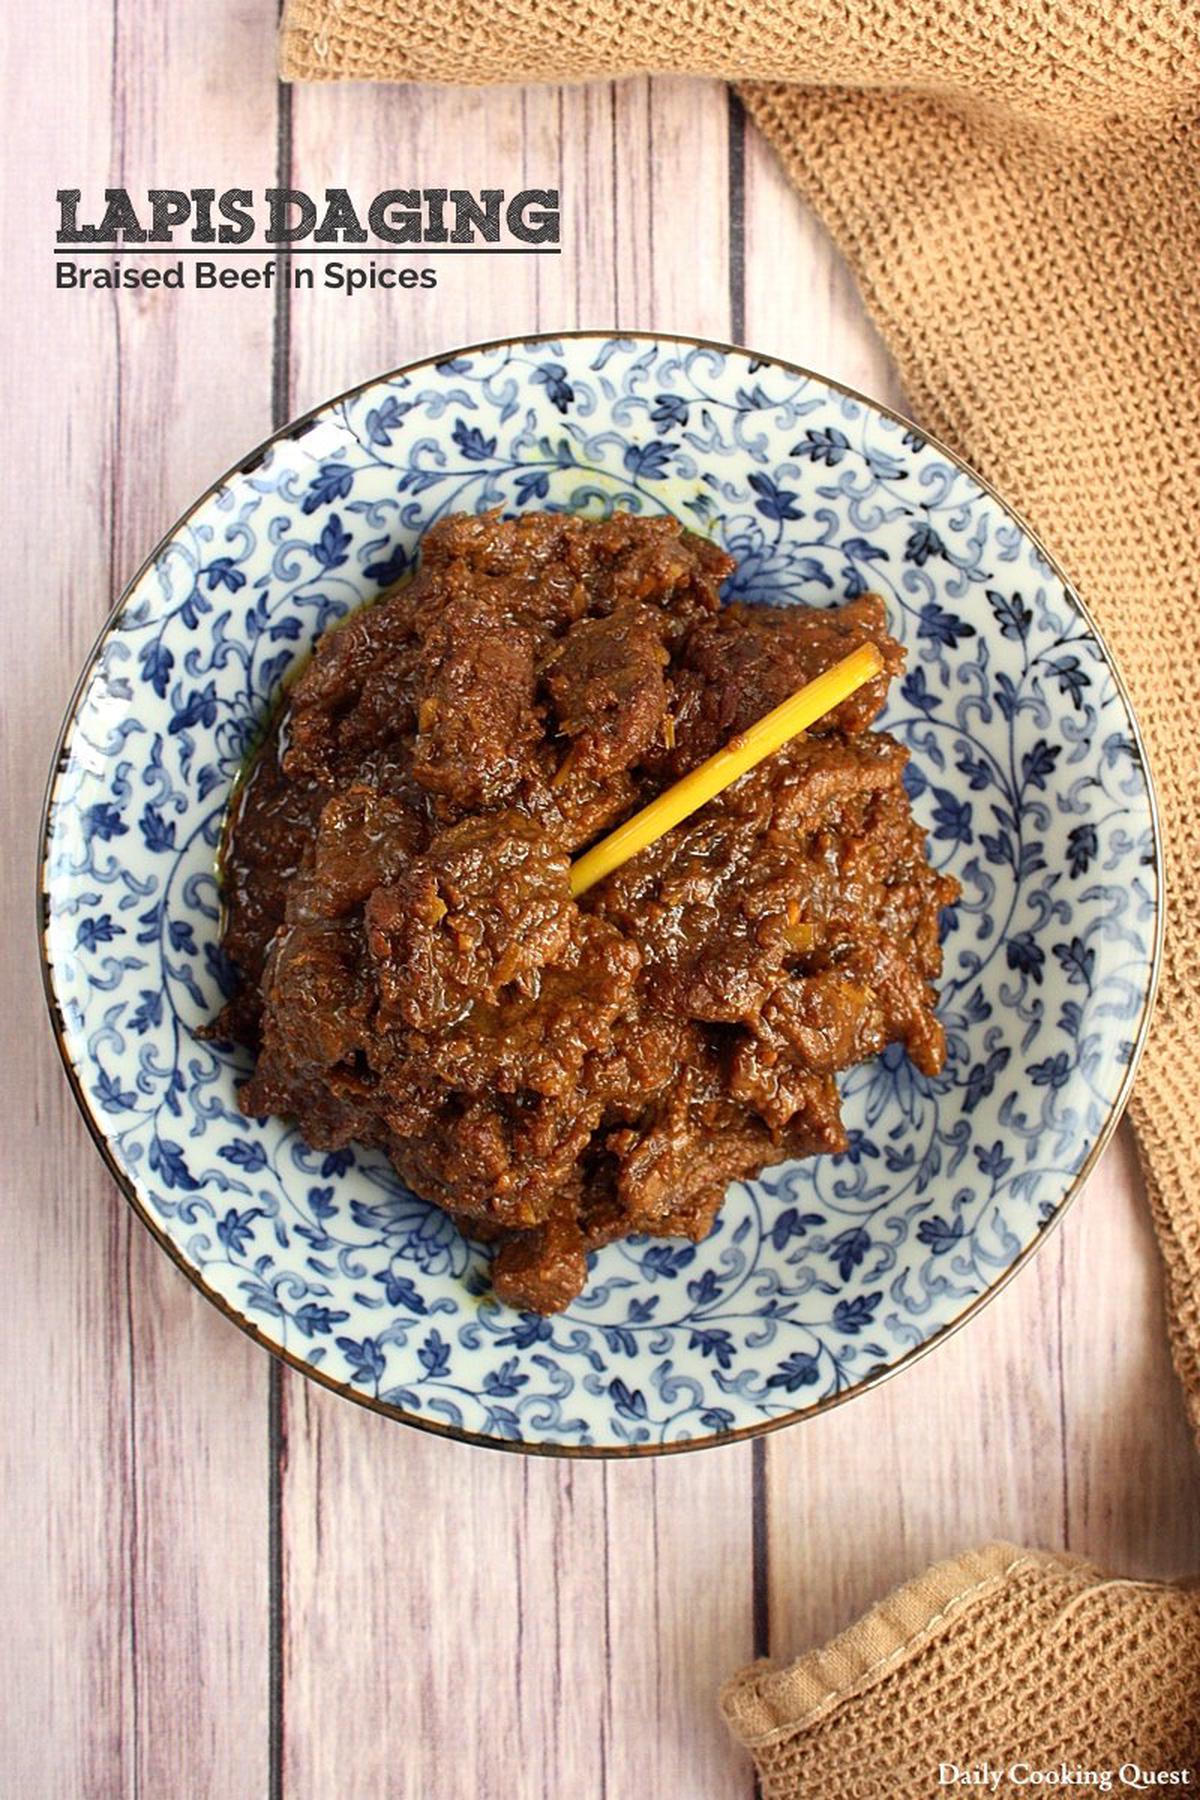 Lapis Daging - Braised Beef in Spices